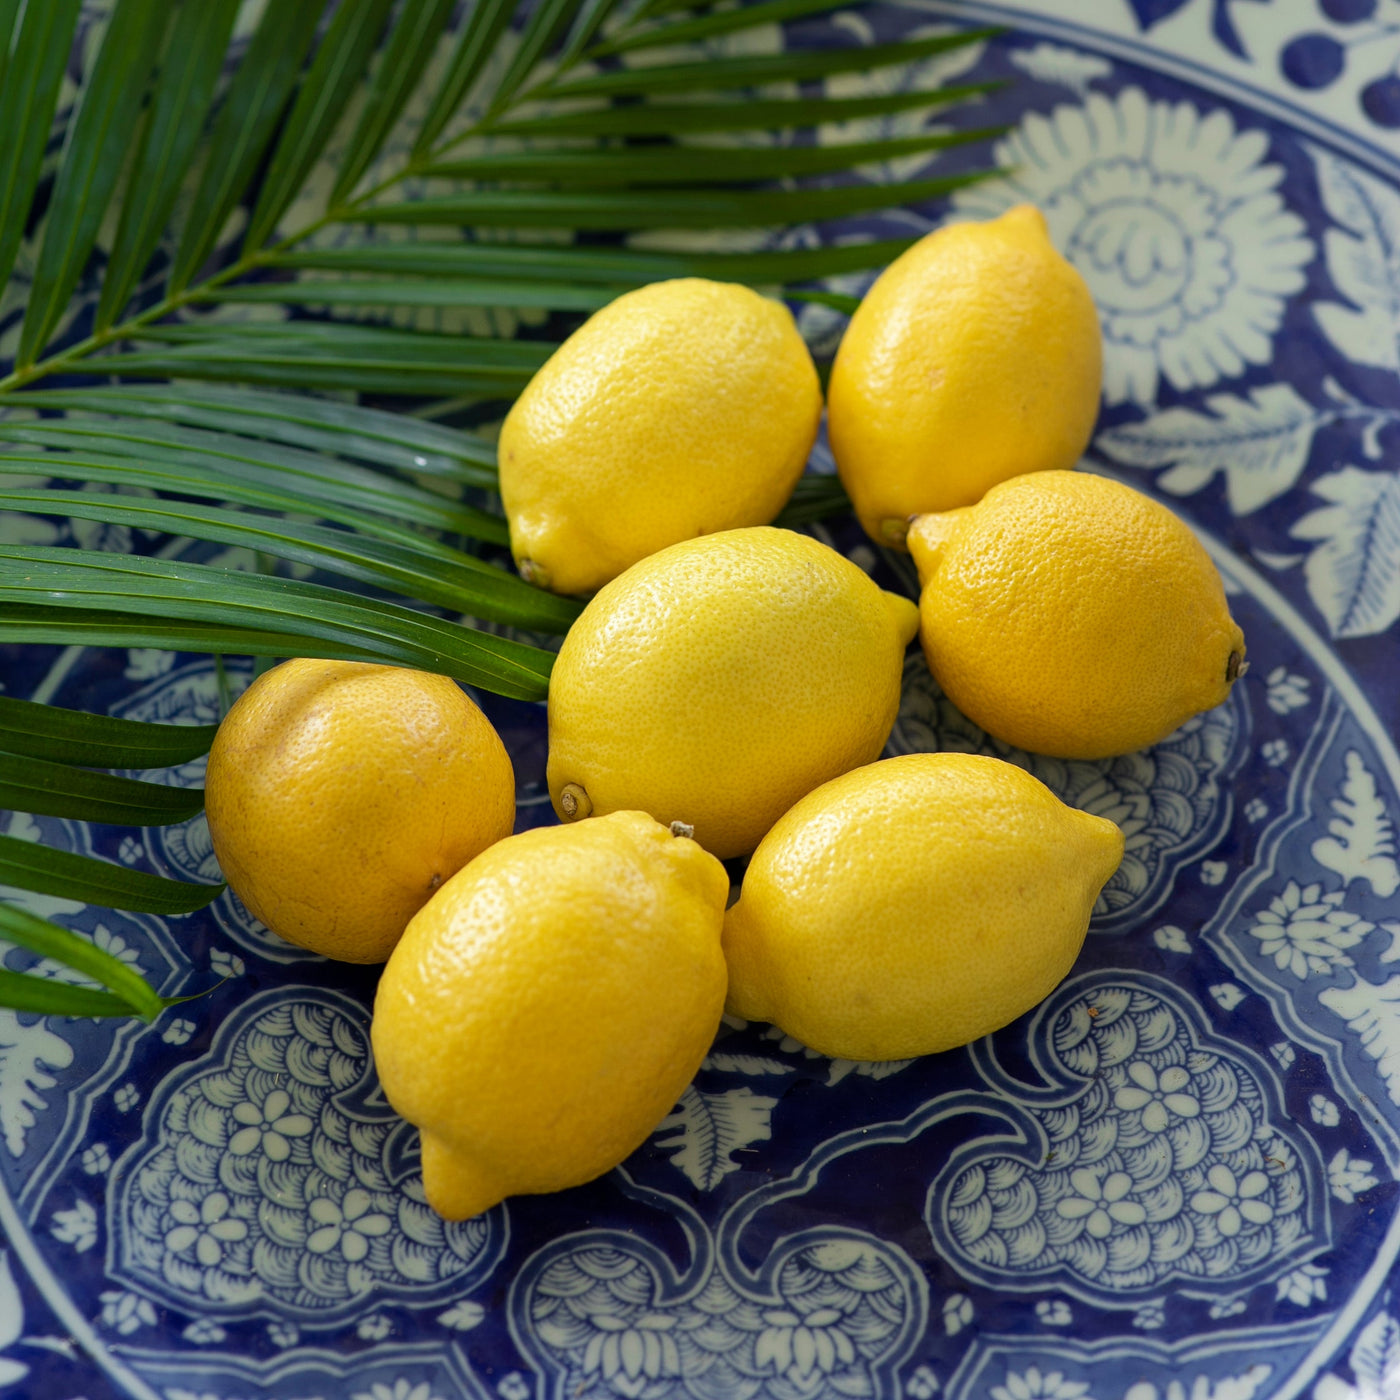 lemon-from-egypt-online-grocery-supermarket-delivery-singapore-thenewgrocer